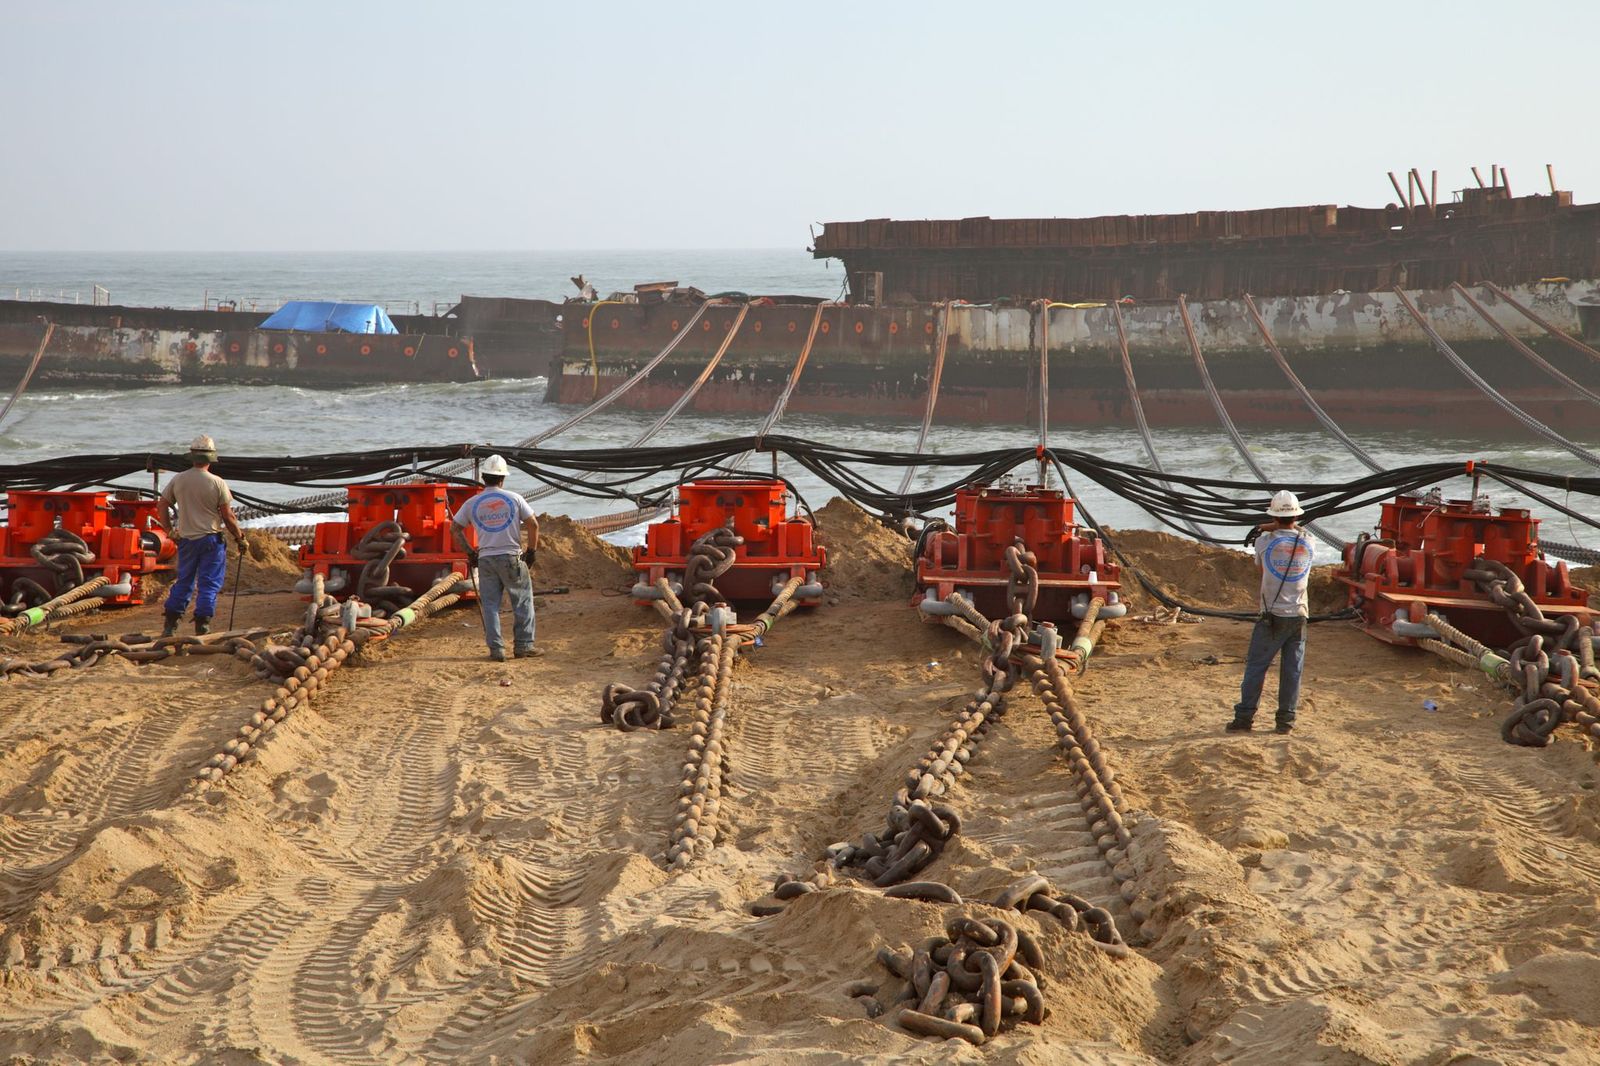 Workers supervise the attachment of chains to a failing ship.